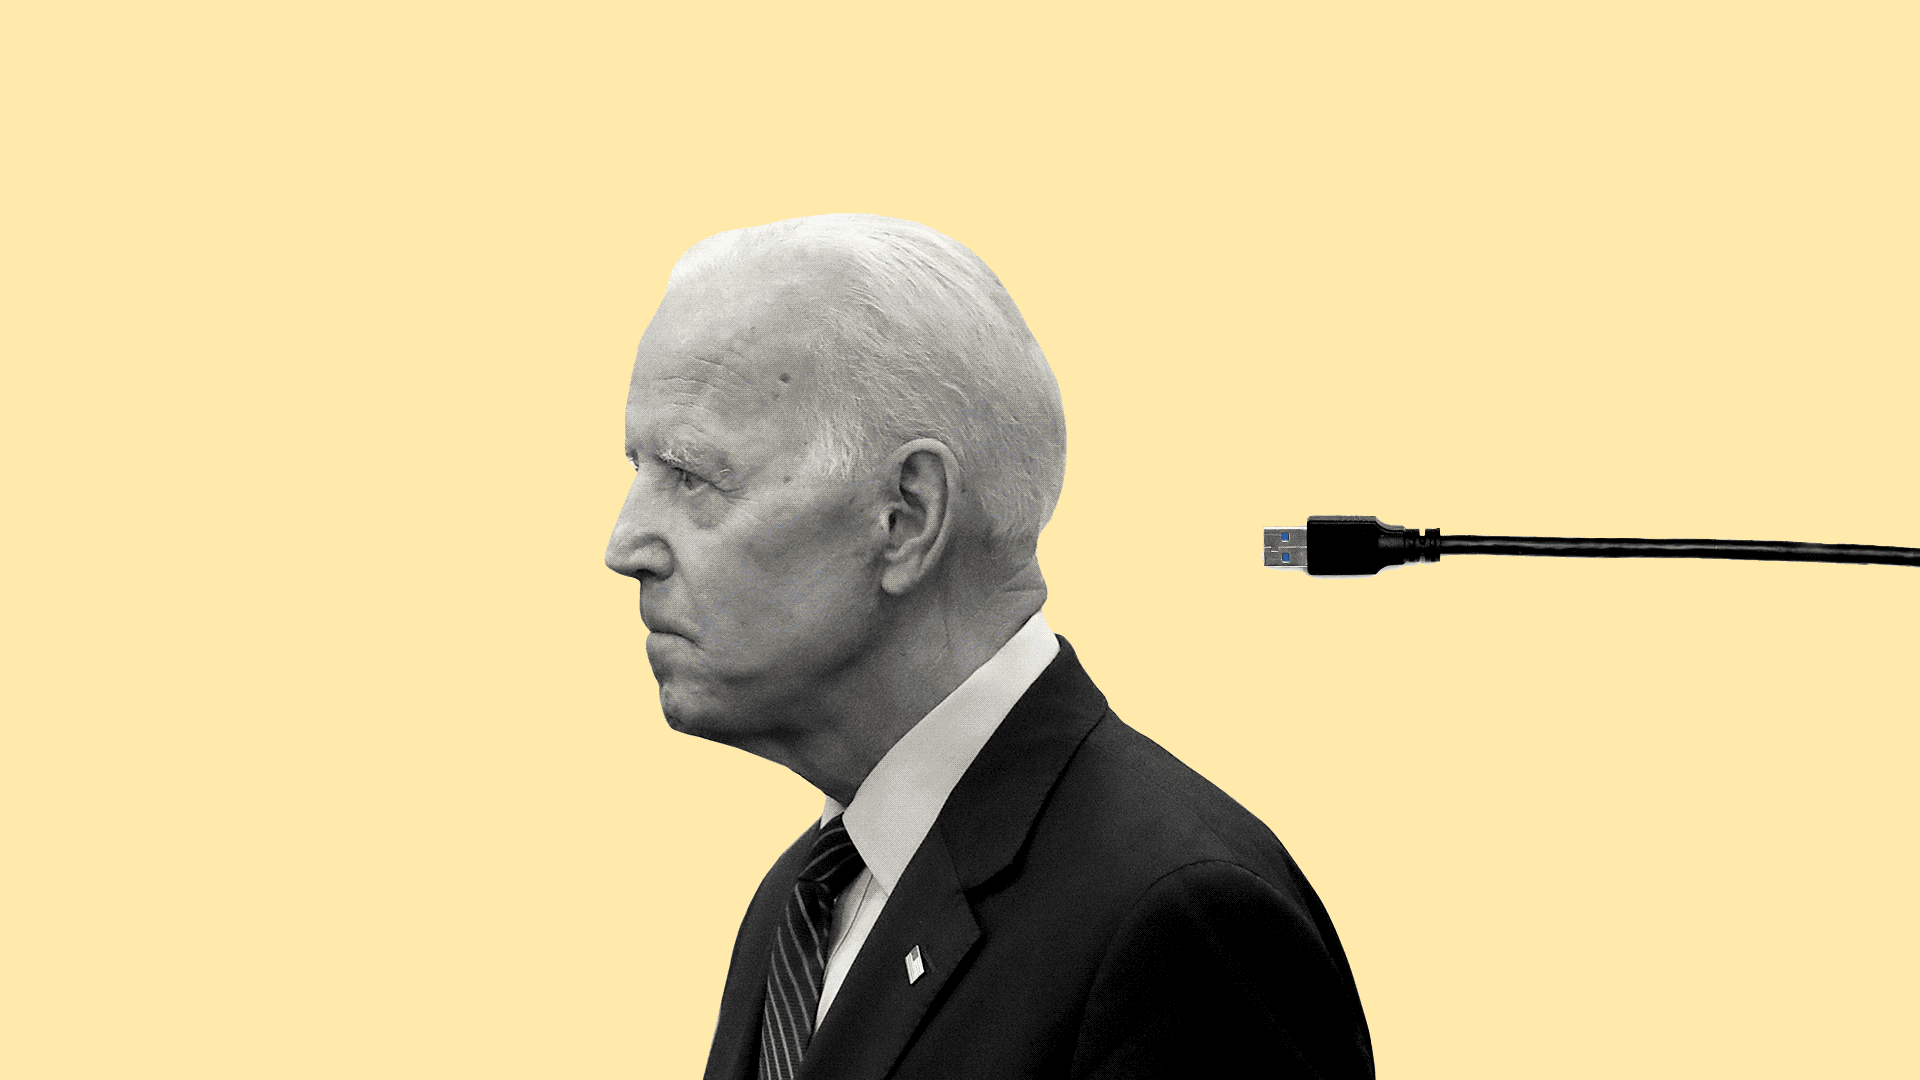 Illustration of Biden being "charged"